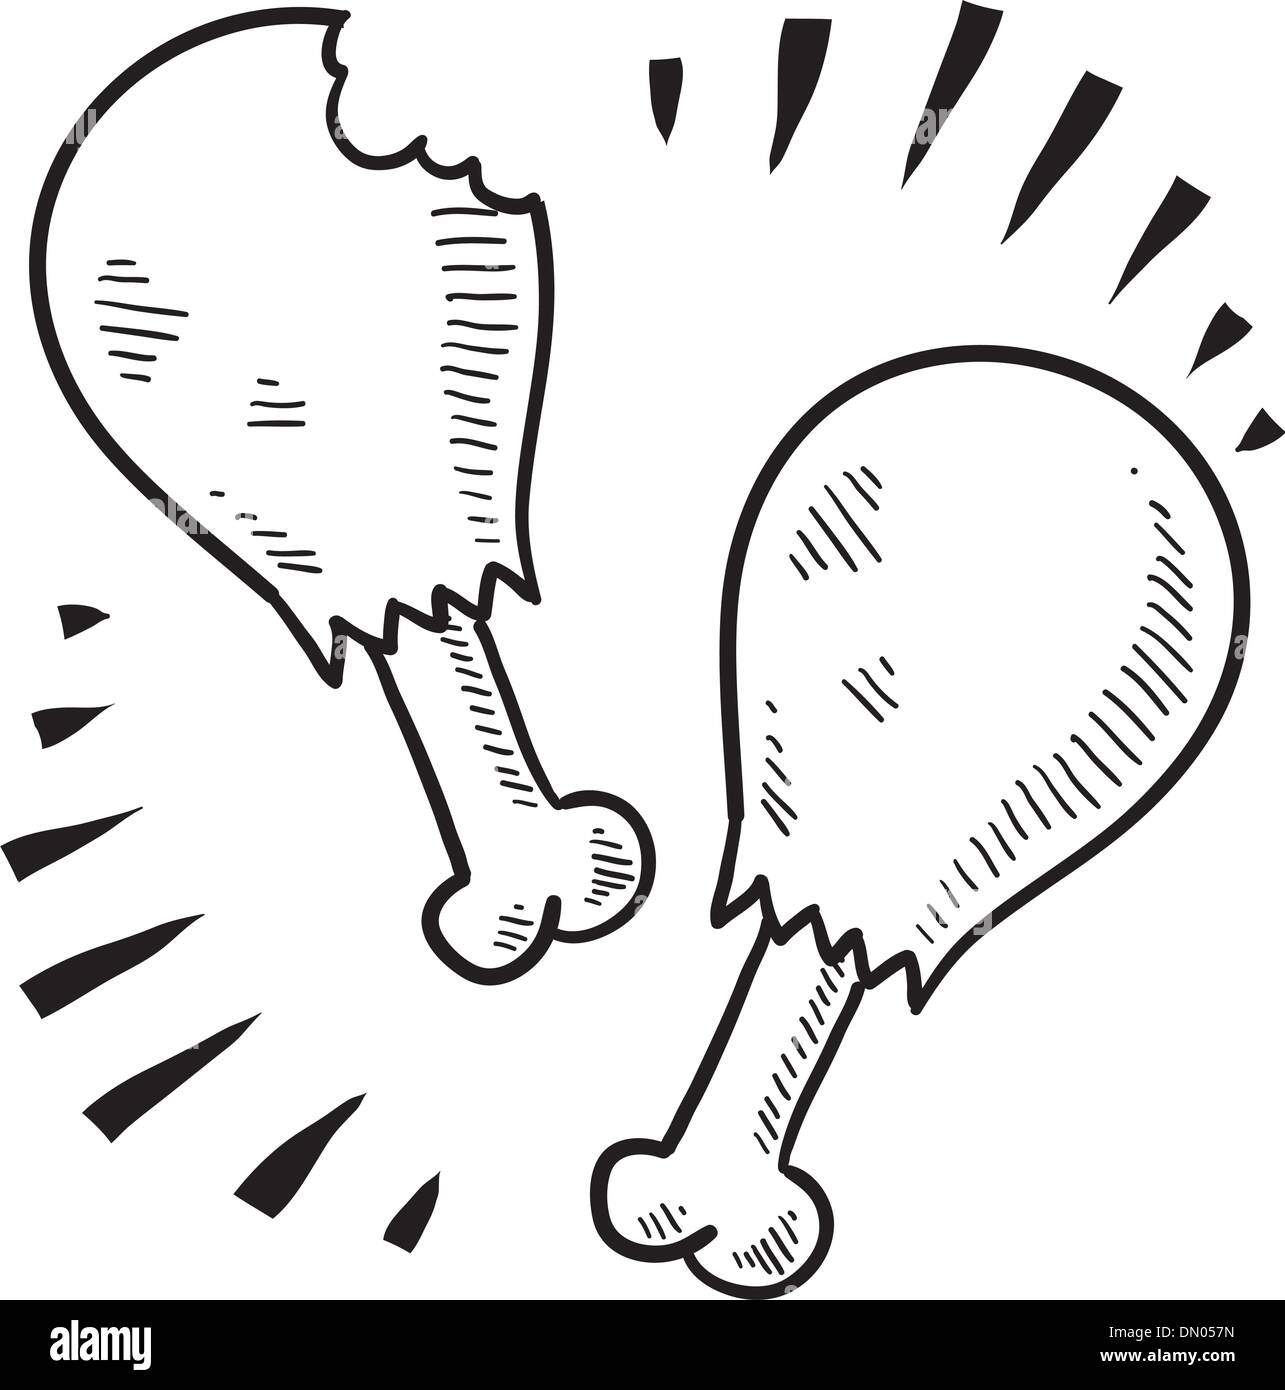 Chicken Drumstick Sketch Coloring Pages - NetArt | Chicken drumsticks,  Drumsticks, Fried chicken